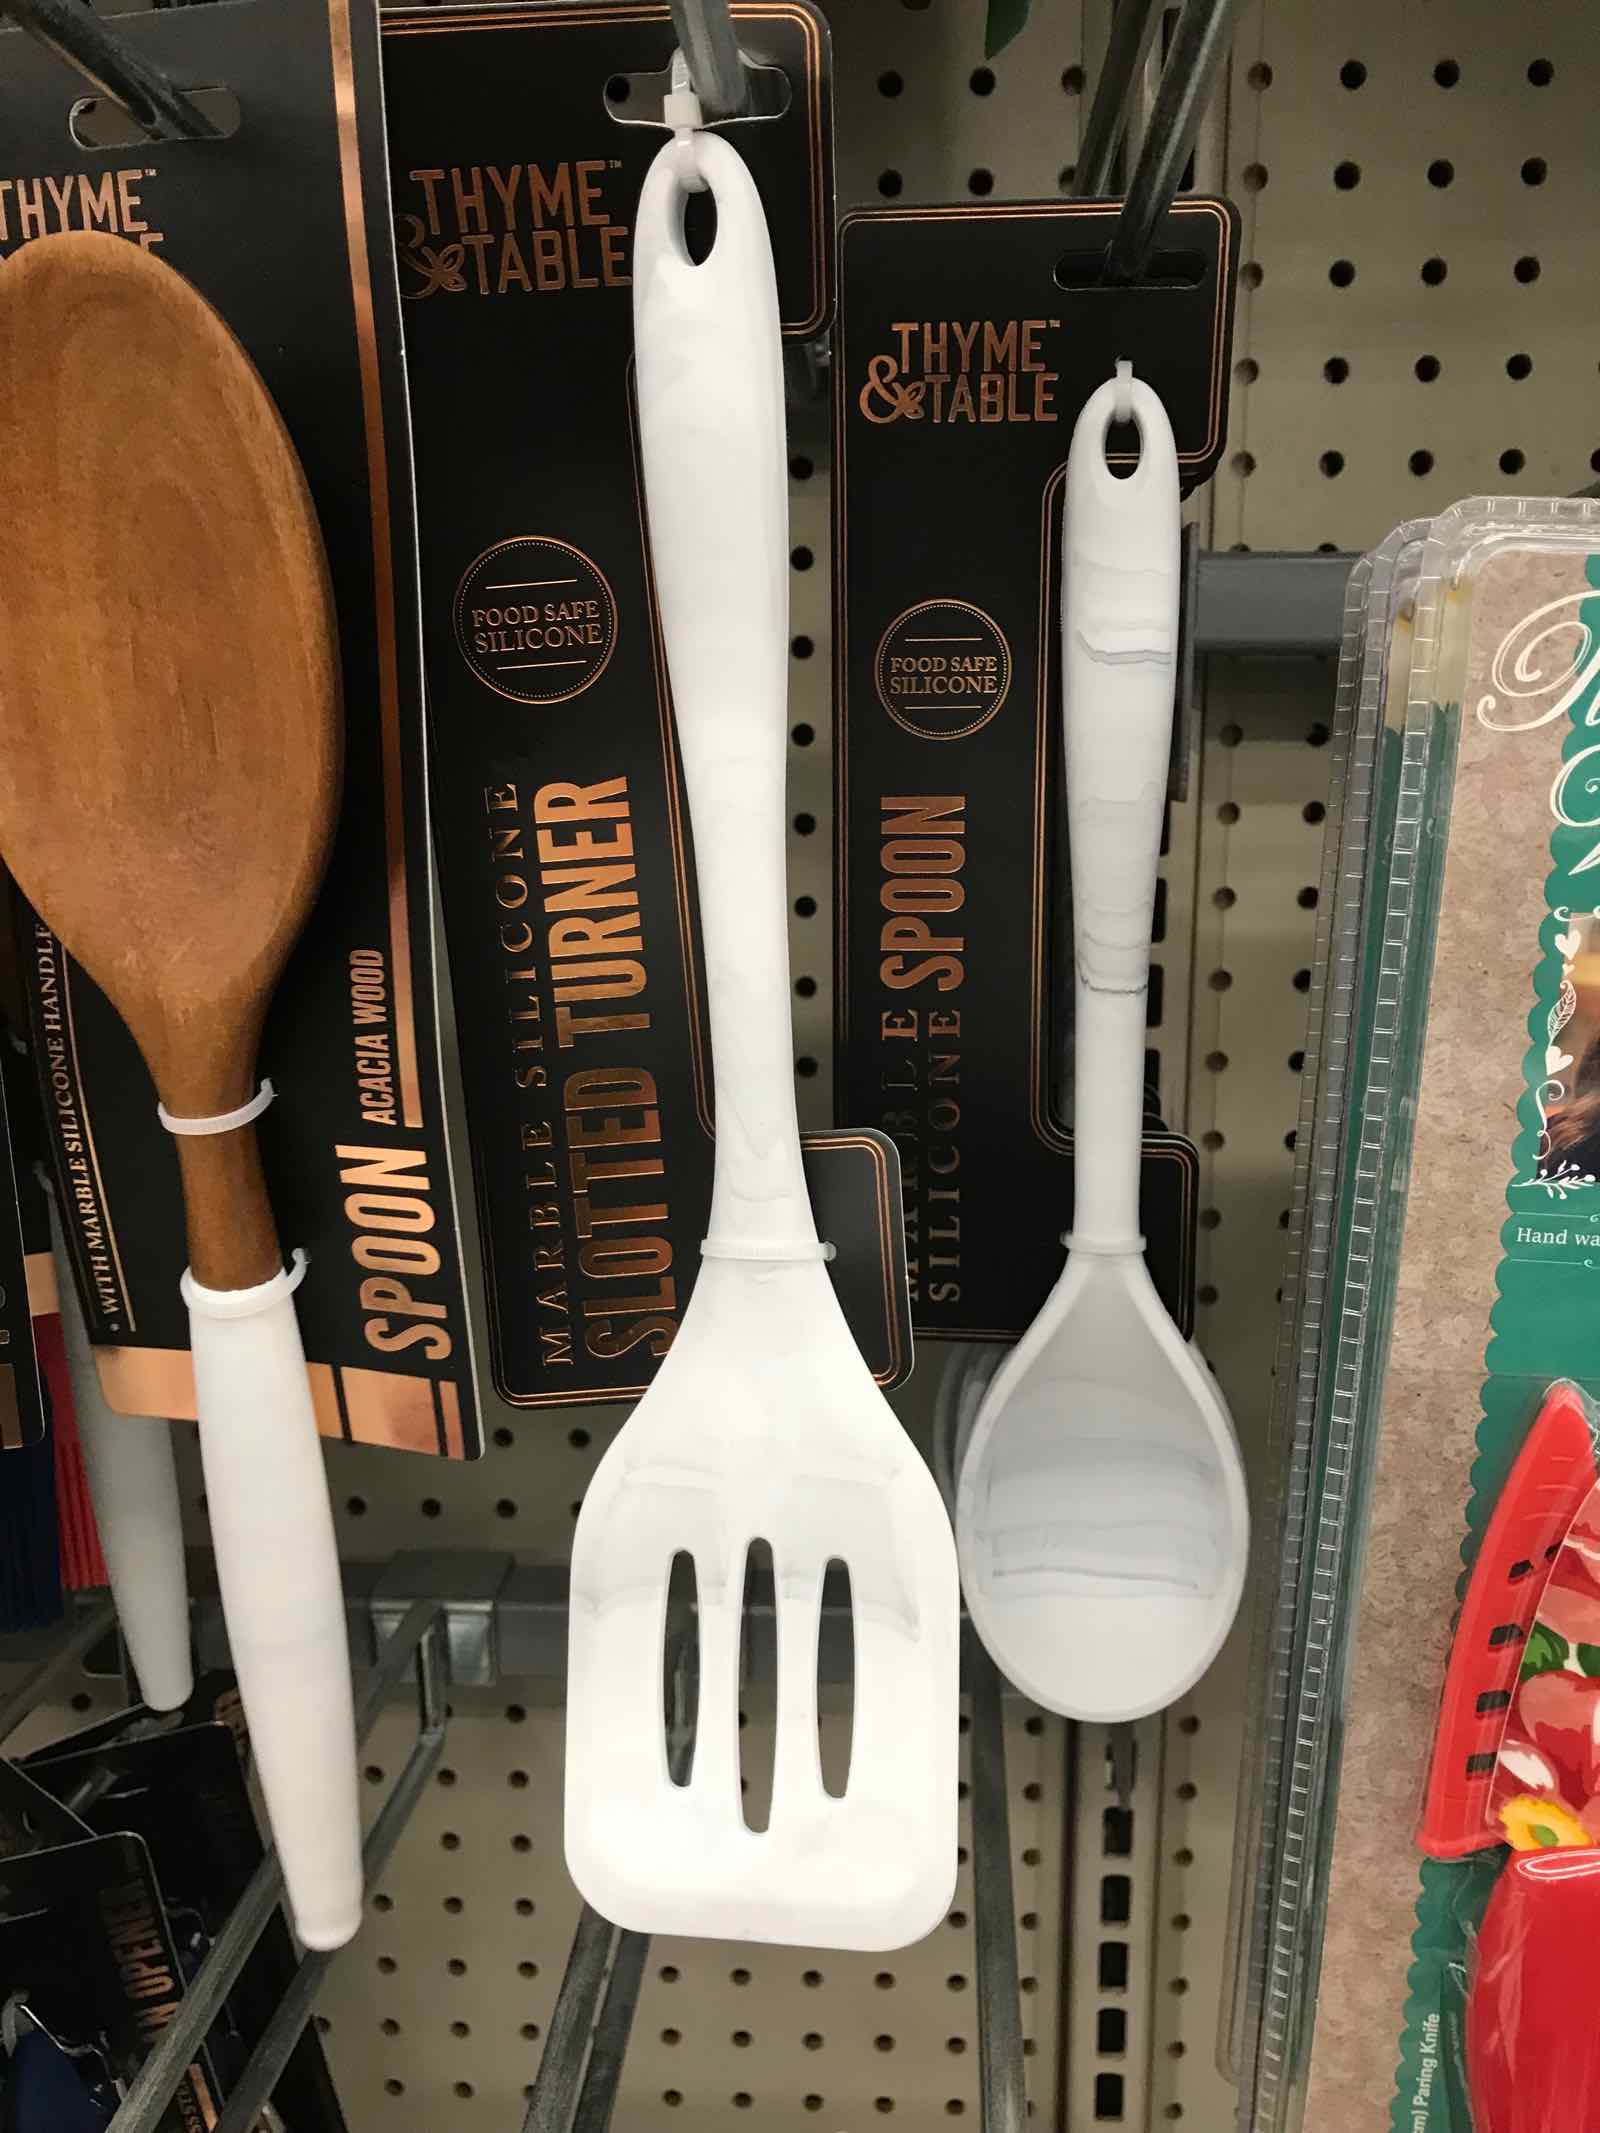 New at Walmart: Thyme and Table Kitchenware - The Budget Babe